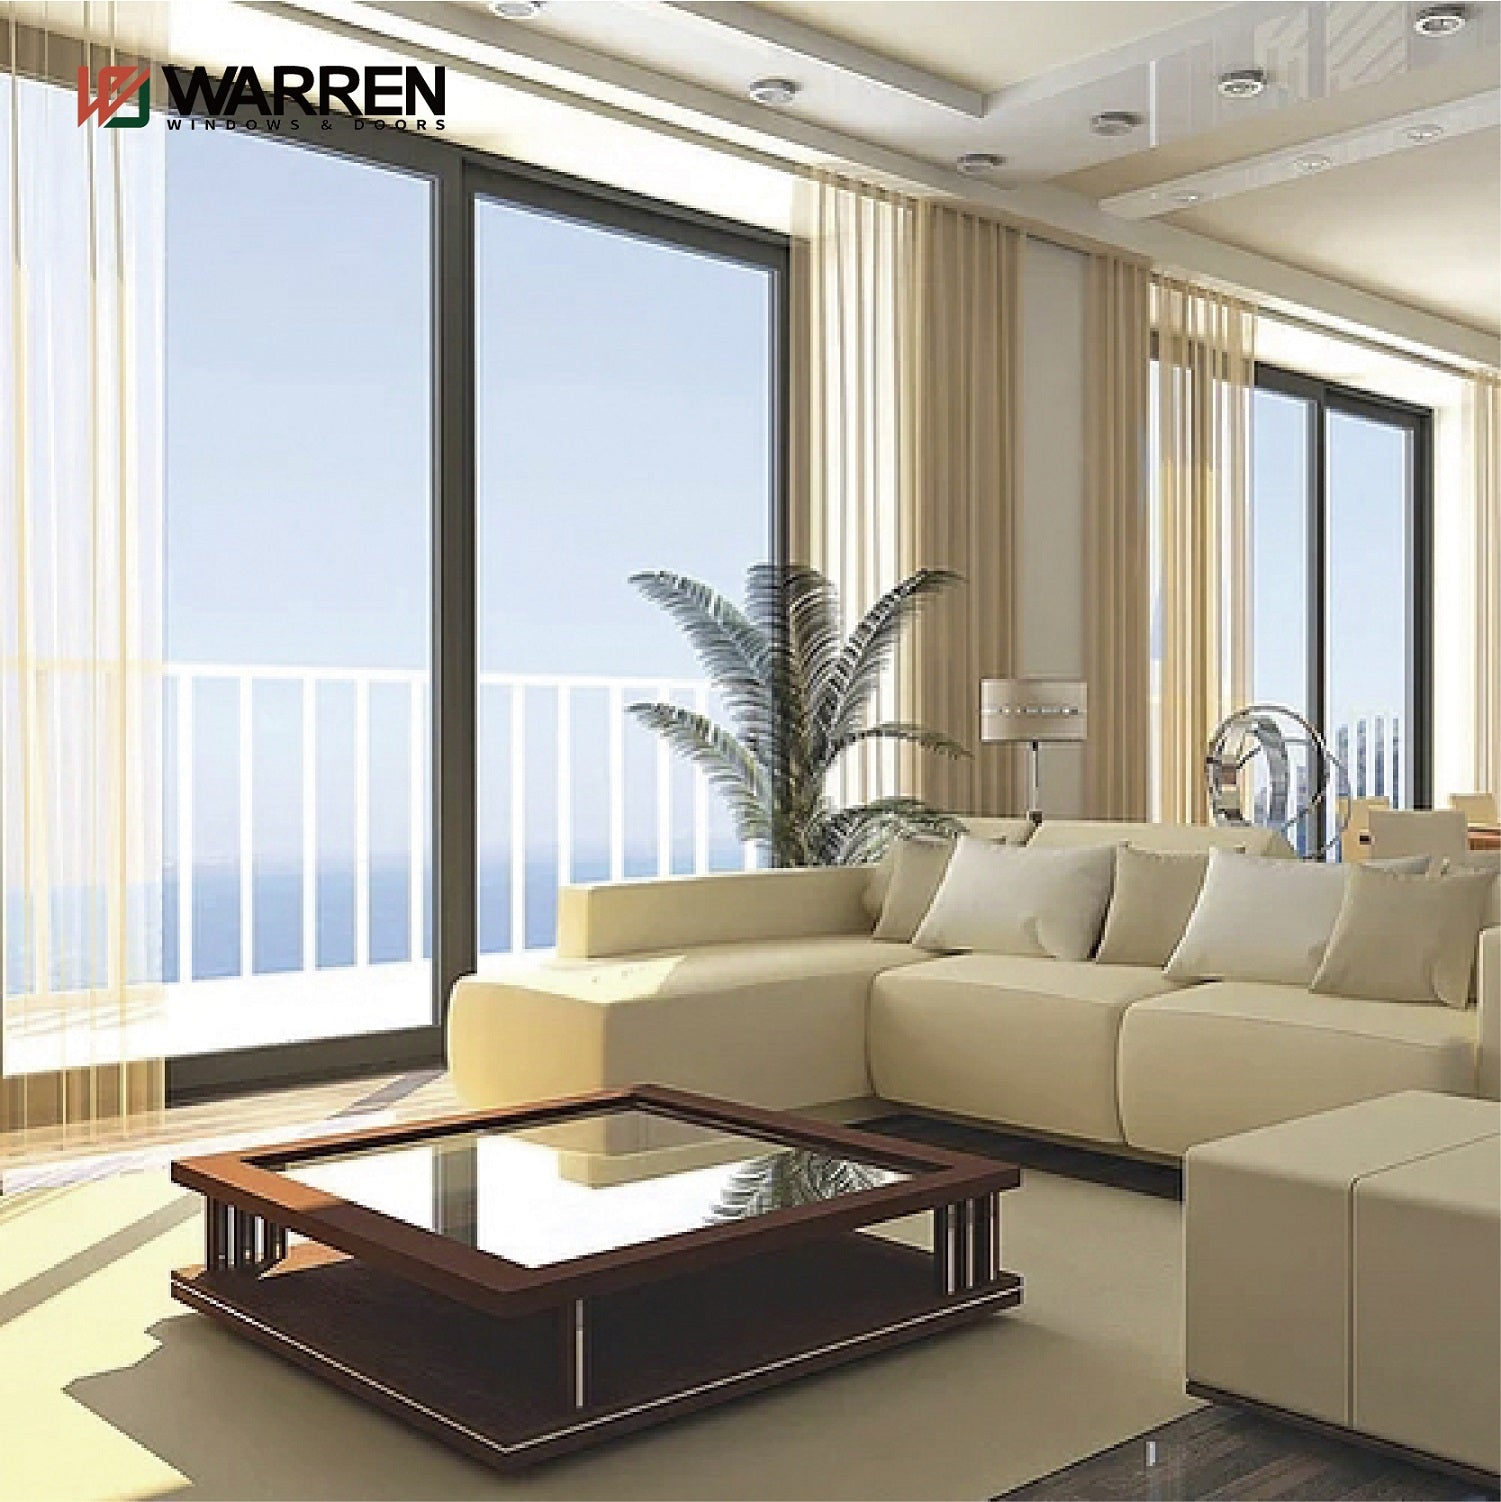 Warren 48x72 window factory customized casement sliding picture window styles with double glass for home